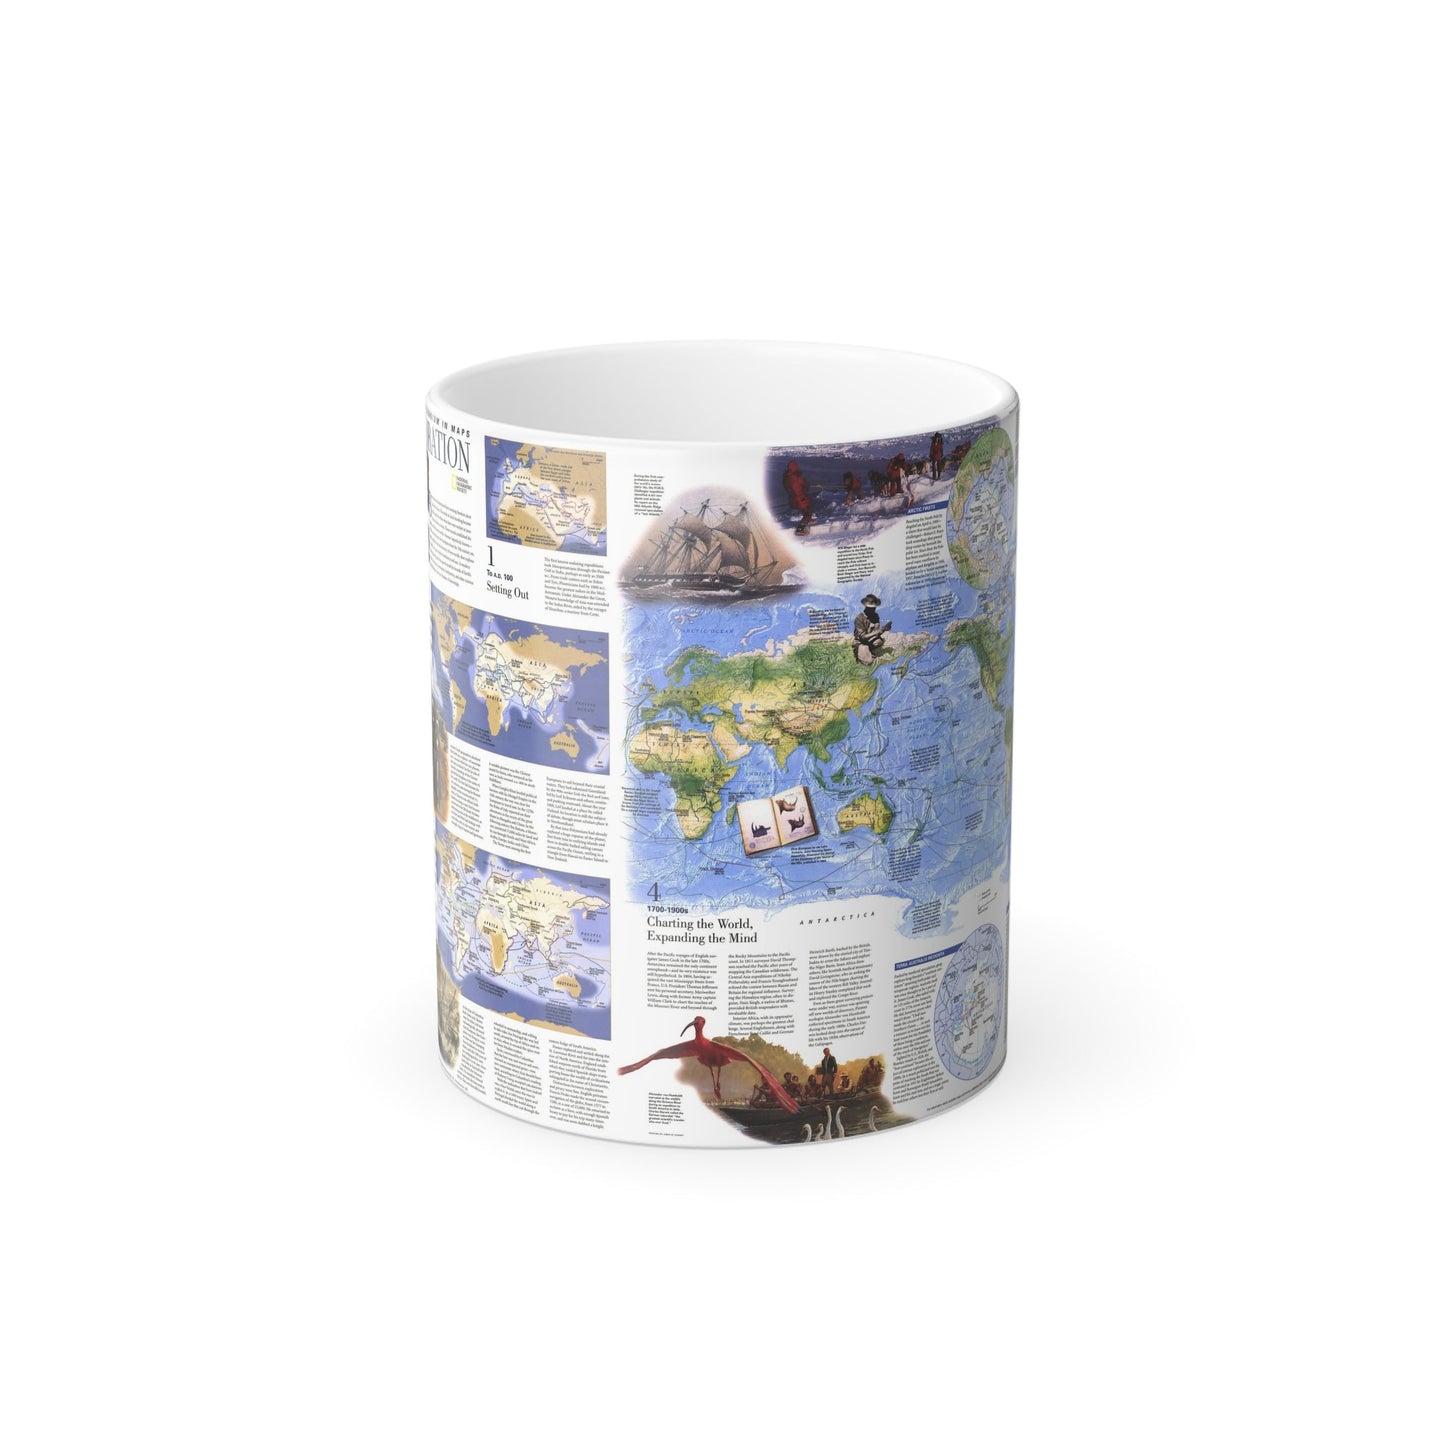 World Map - Exploration (1998) (Map) Color Changing Mug 11oz-11oz-The Sticker Space